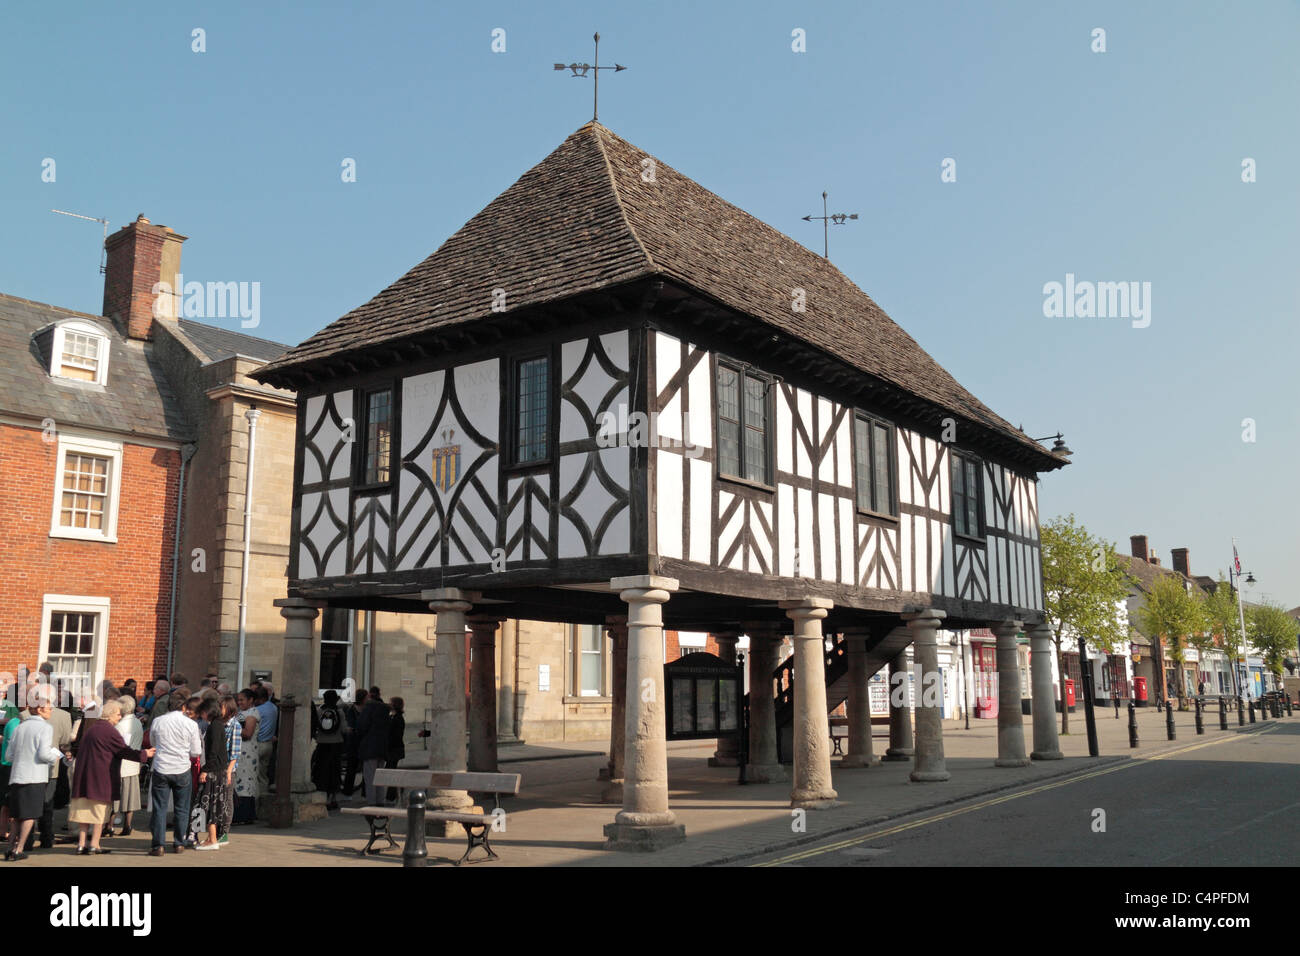 The former Town Hall building dominates the main street in the small Wiltshire village of Royal Wootton Bassett, England, UK. Stock Photo